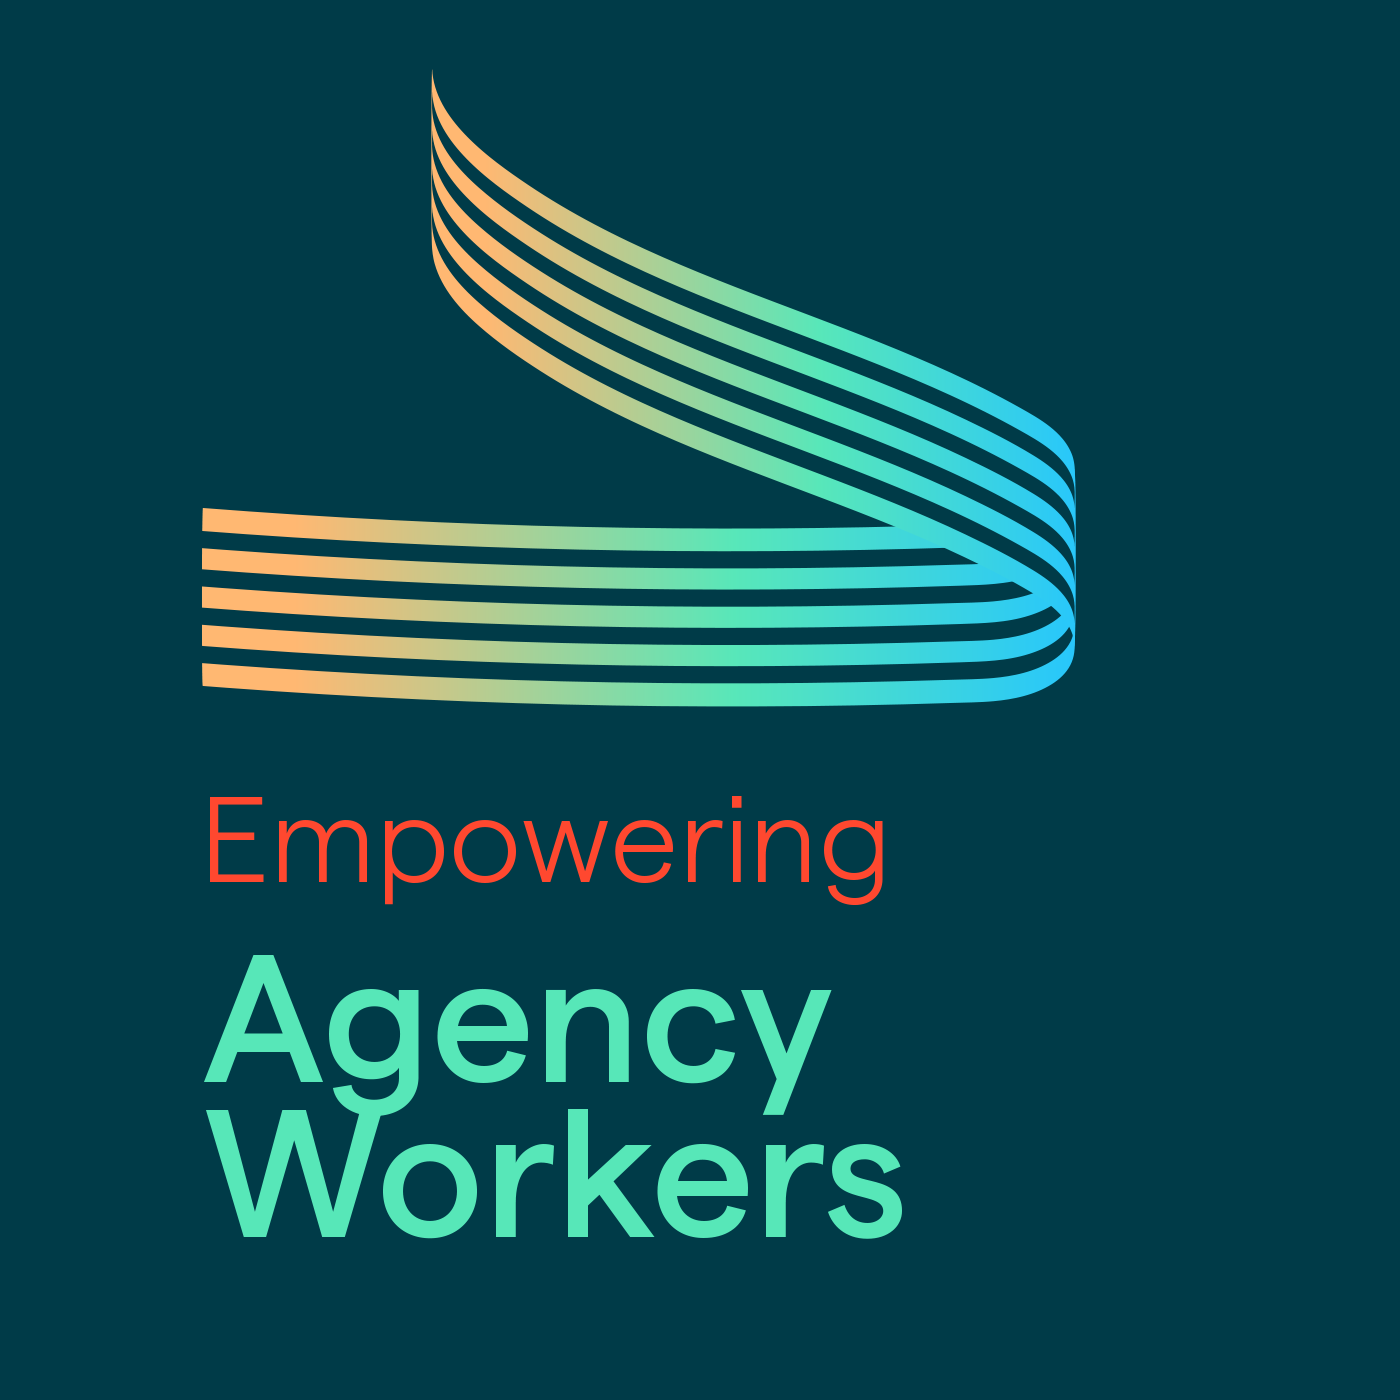 Empowering Agency Workers